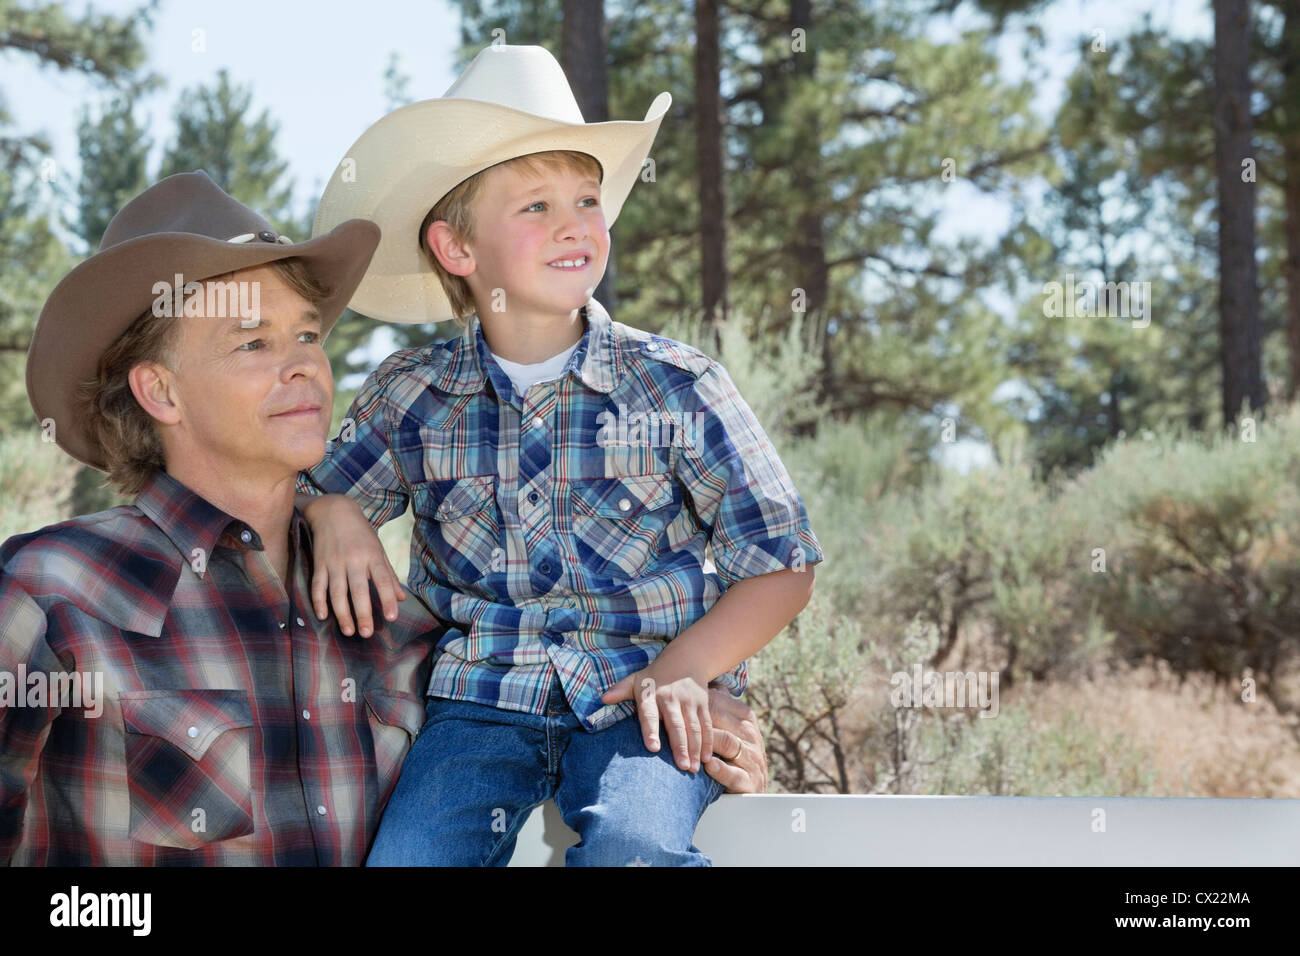 Mature father and son wearing cowboy hats looking away in park Stock Photo